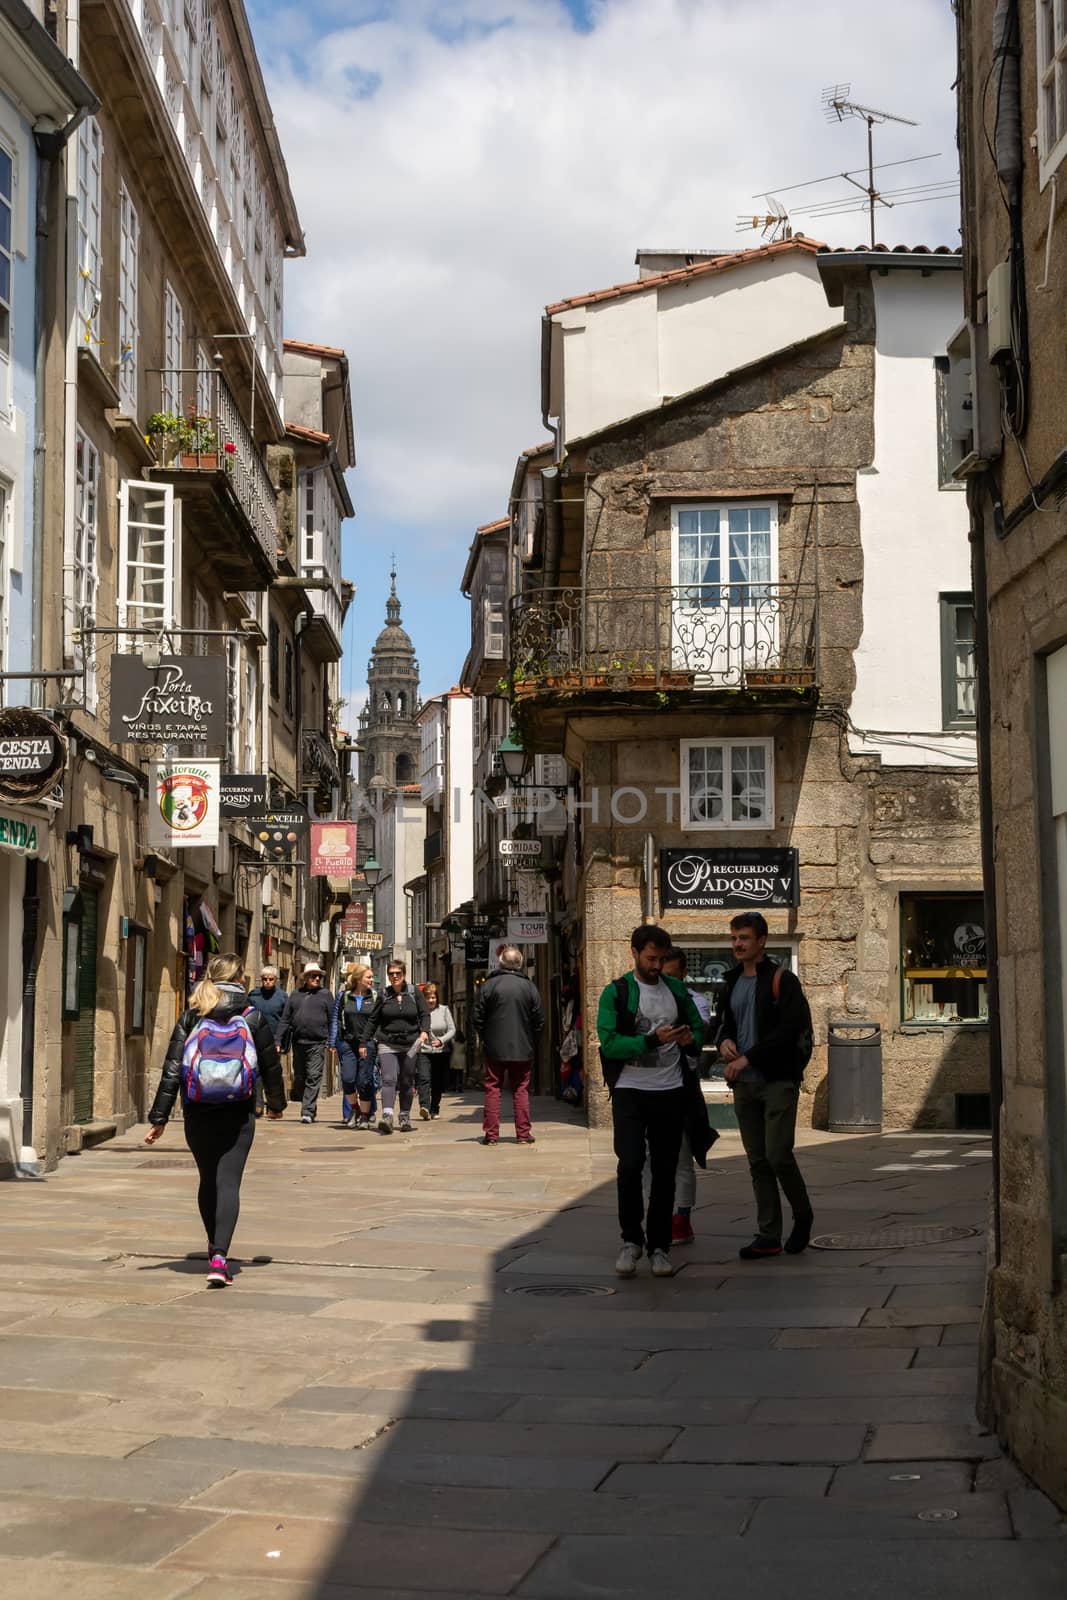 View on the arcade streets of the old town of Santiago de Compostela in Spain by kb79